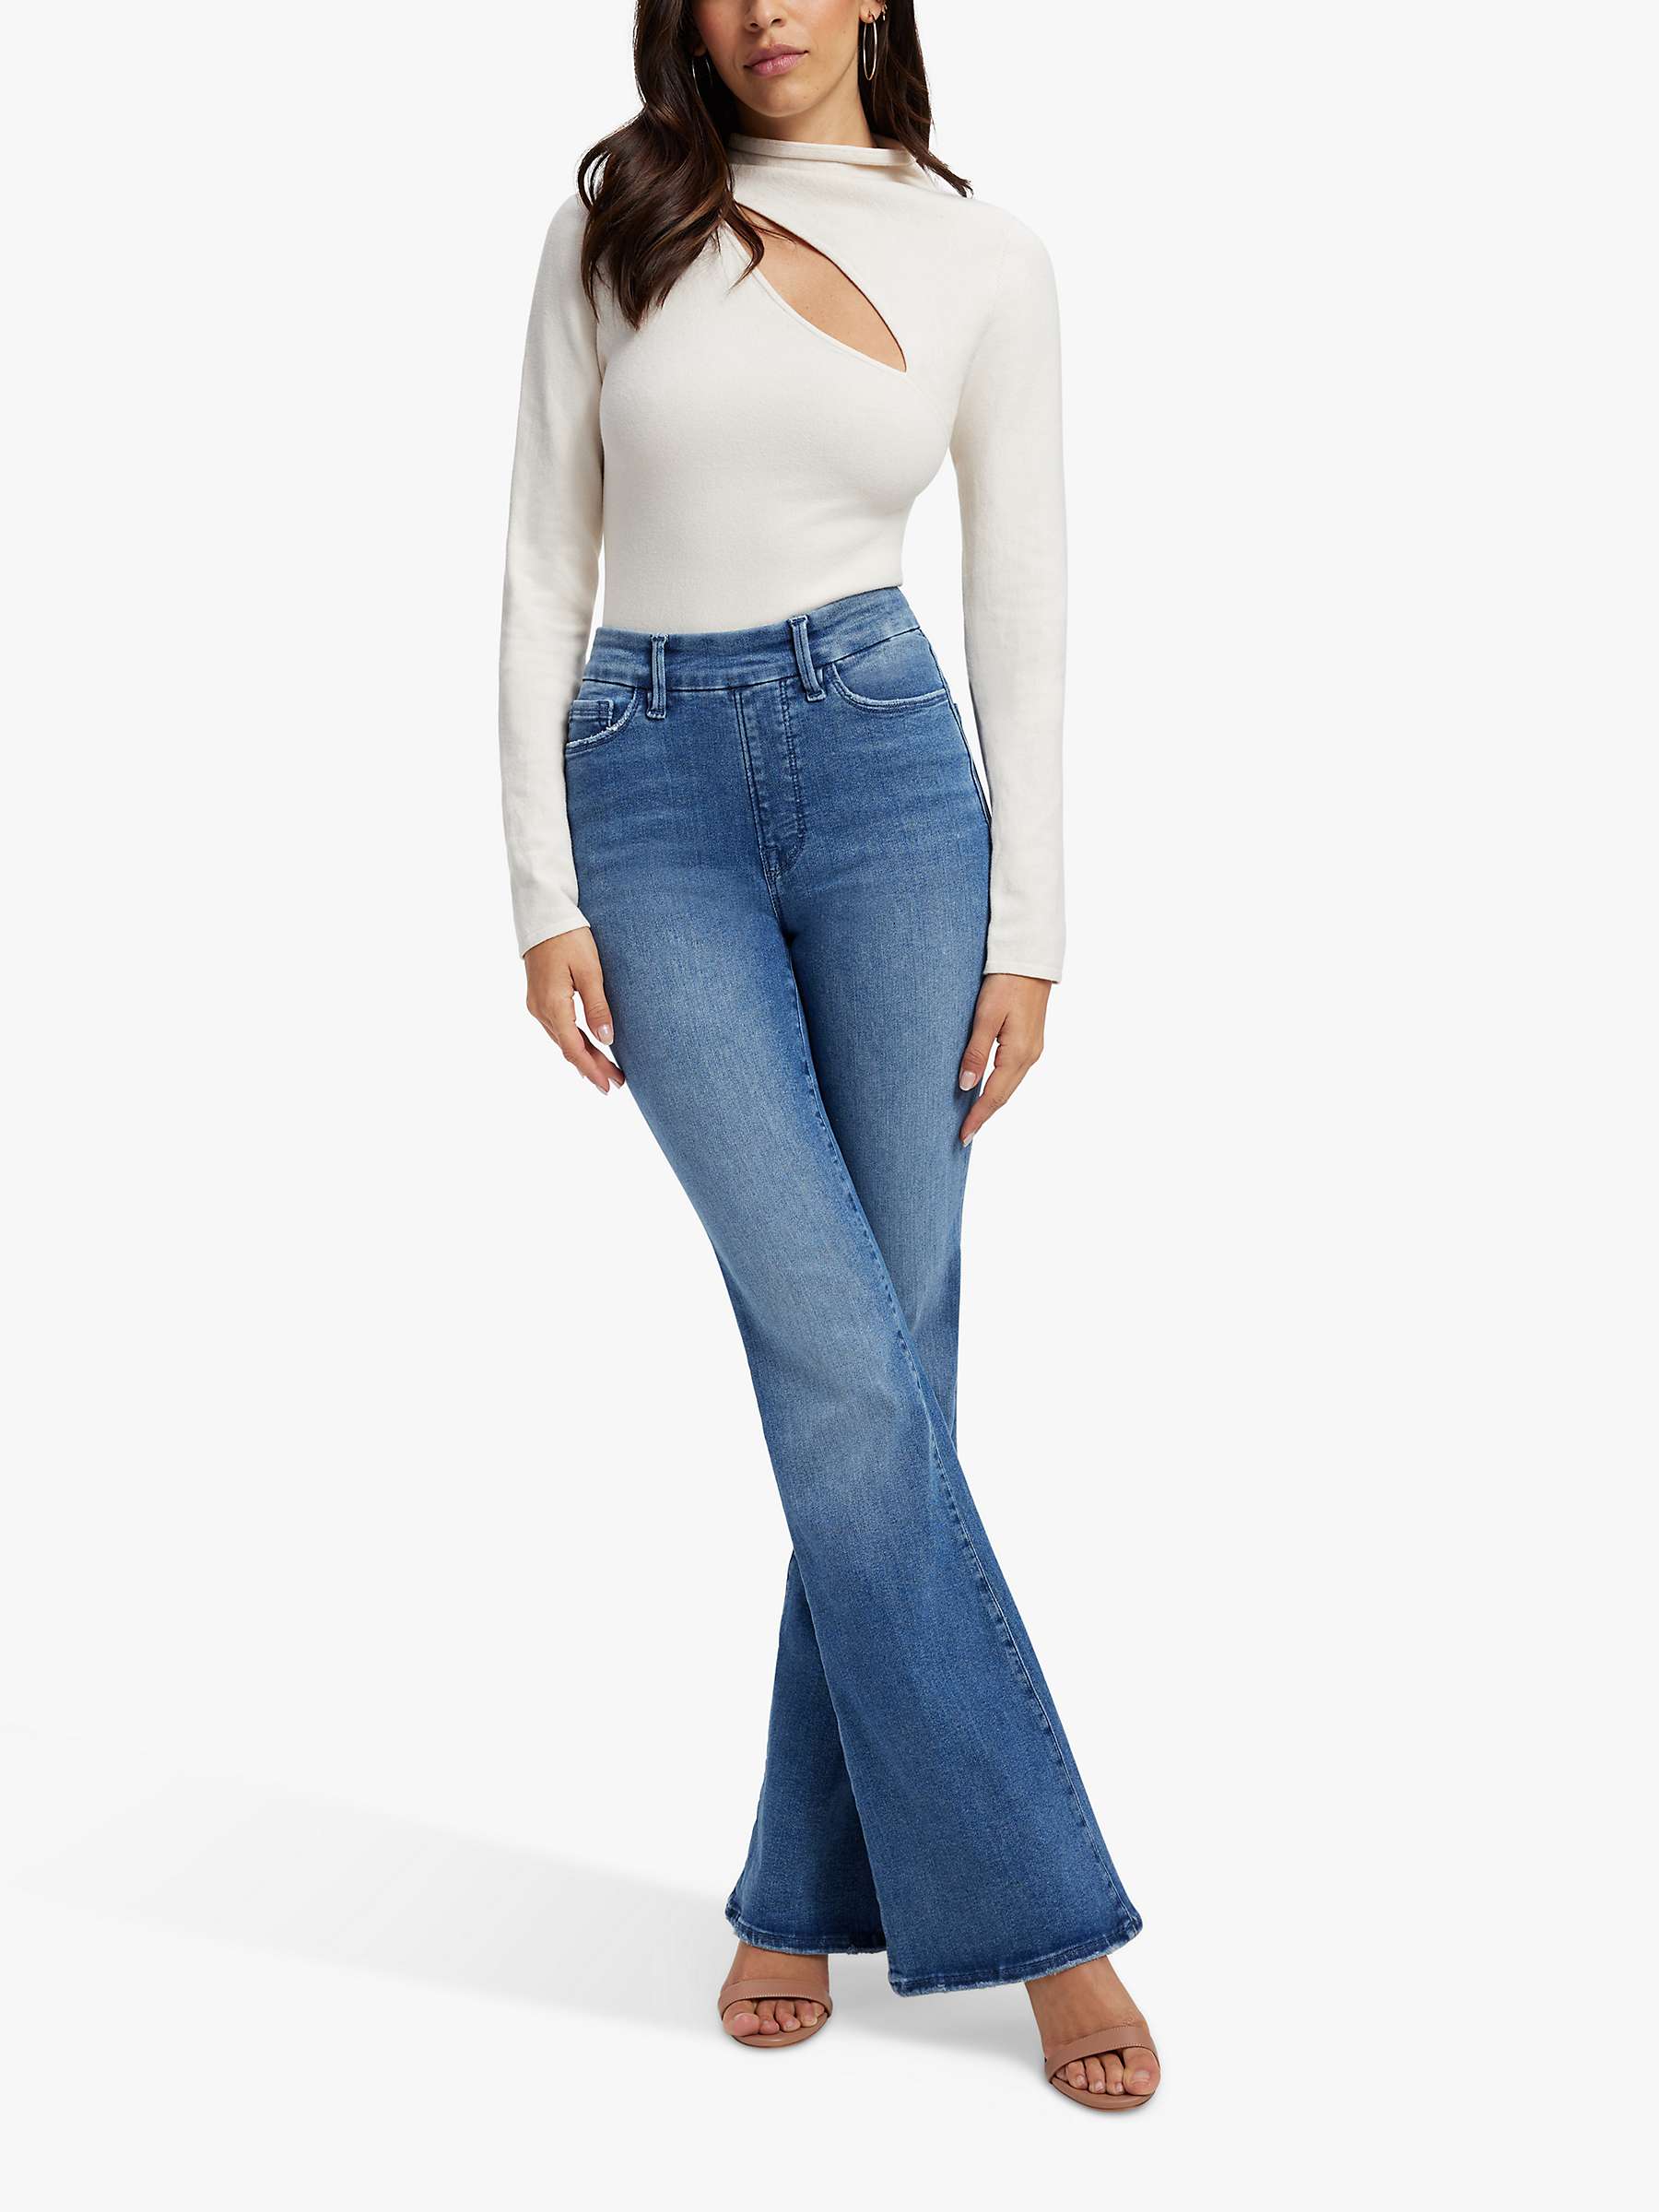 Buy Good American Pull On Flared Jeans, Indigo Online at johnlewis.com